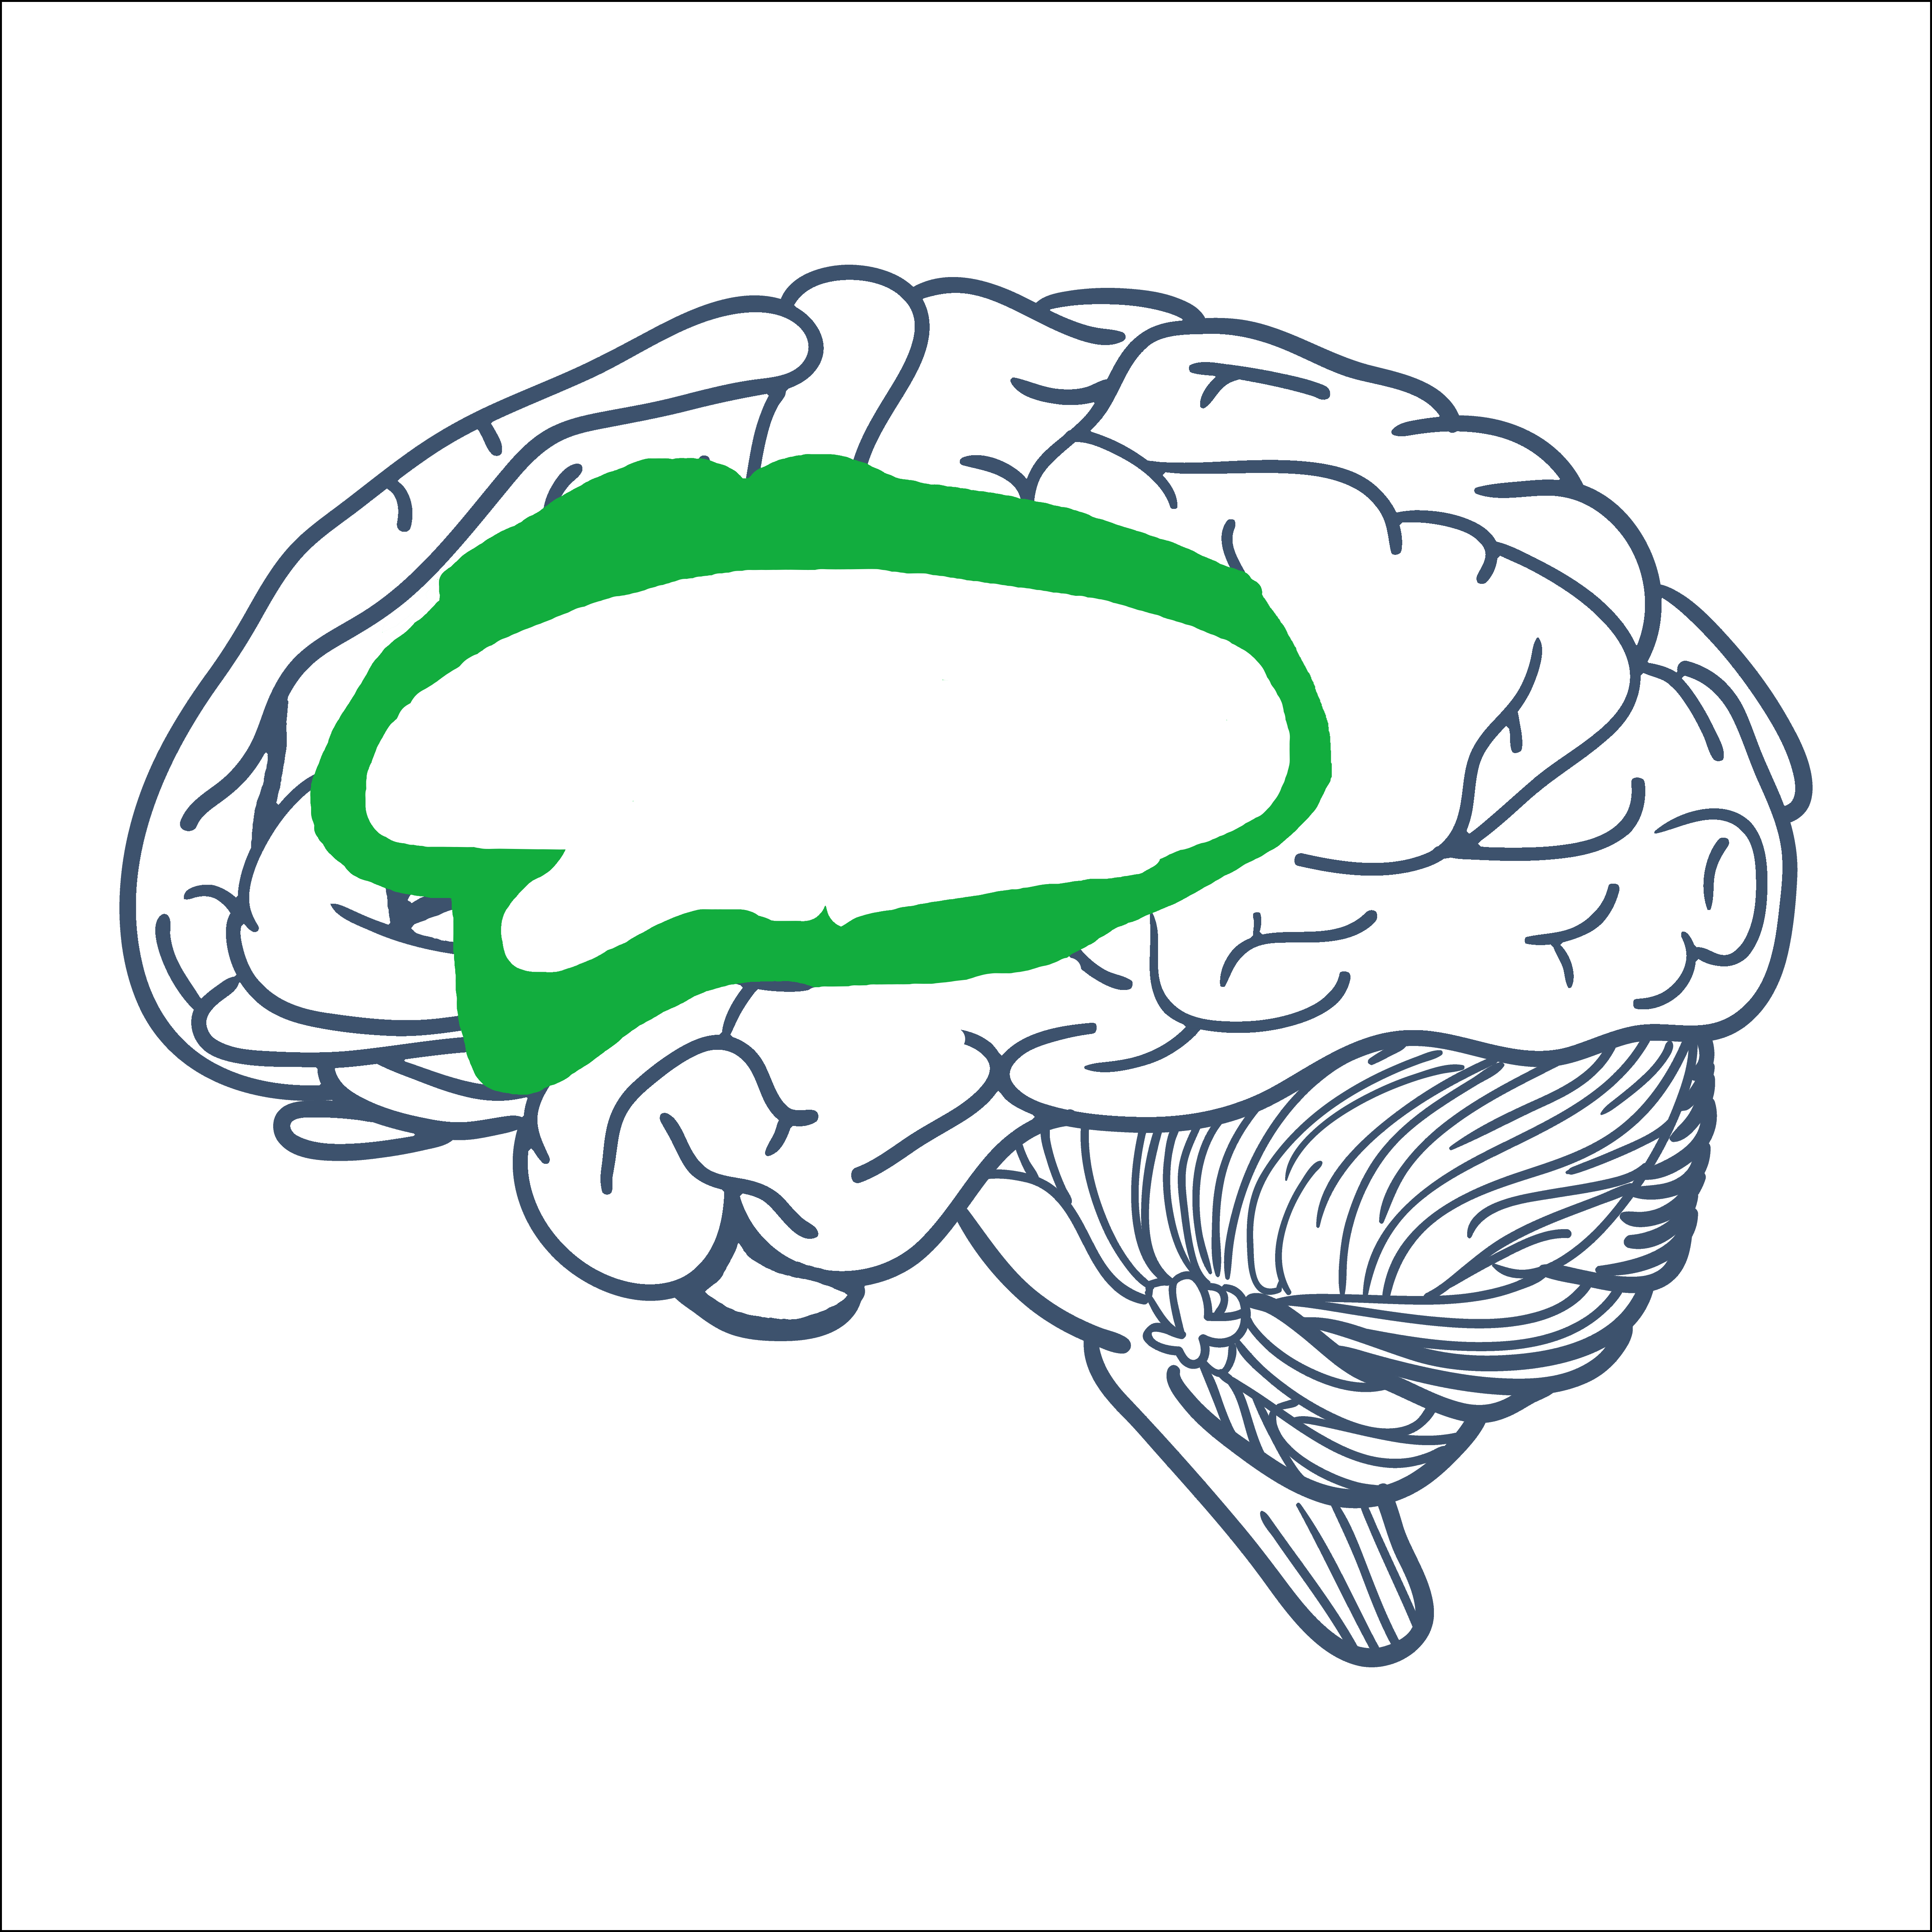 green shaded area on brain that affects the affective networking